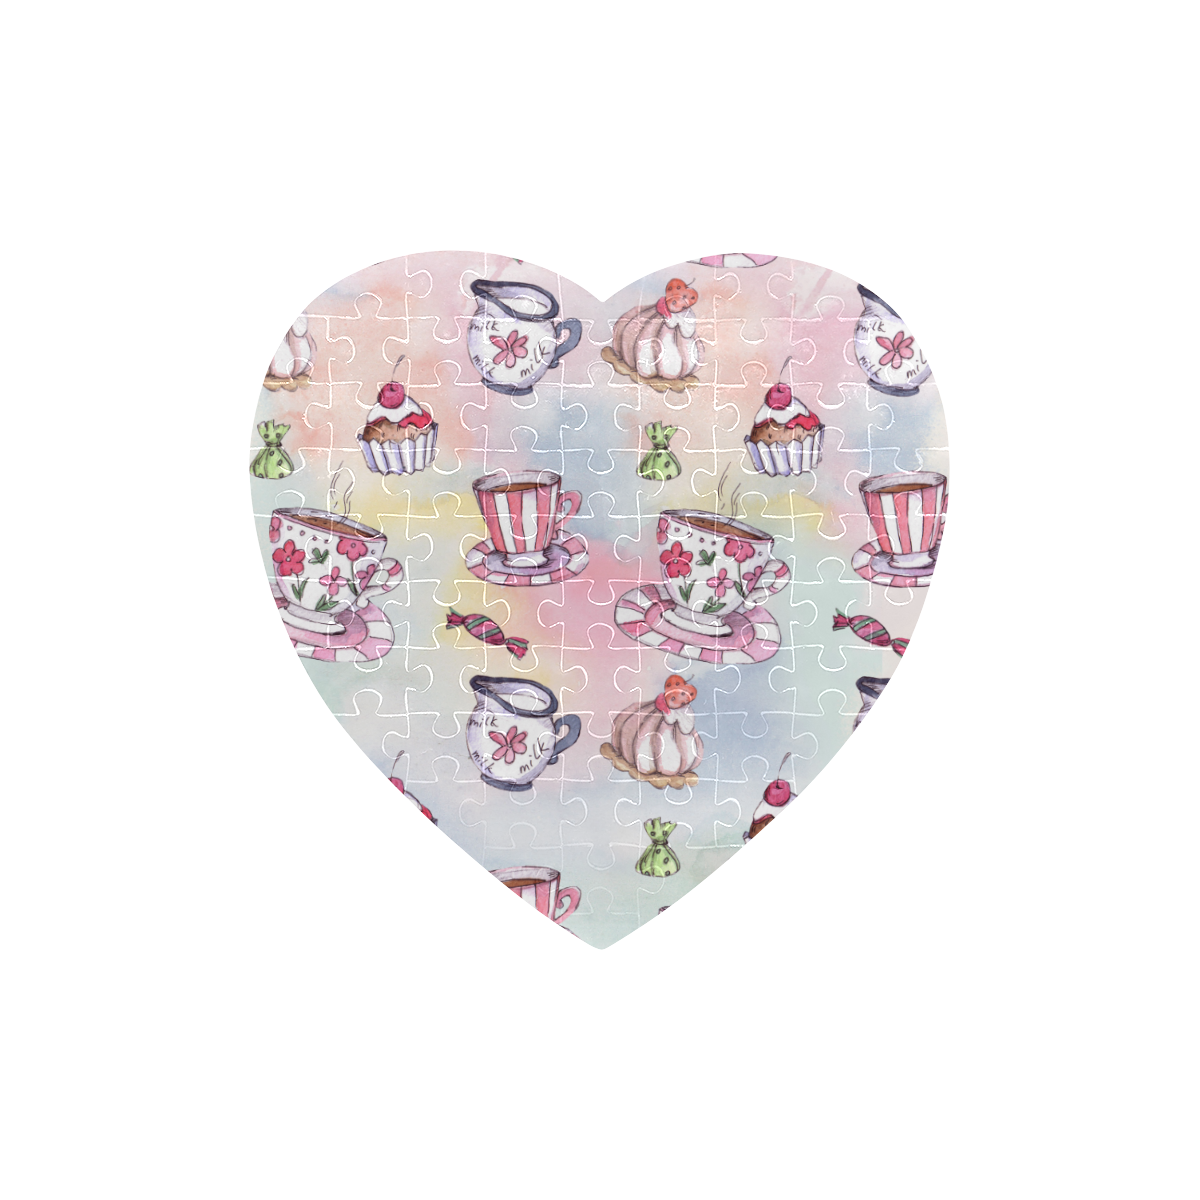 Coffee and sweeets Heart-Shaped Jigsaw Puzzle (Set of 75 Pieces)